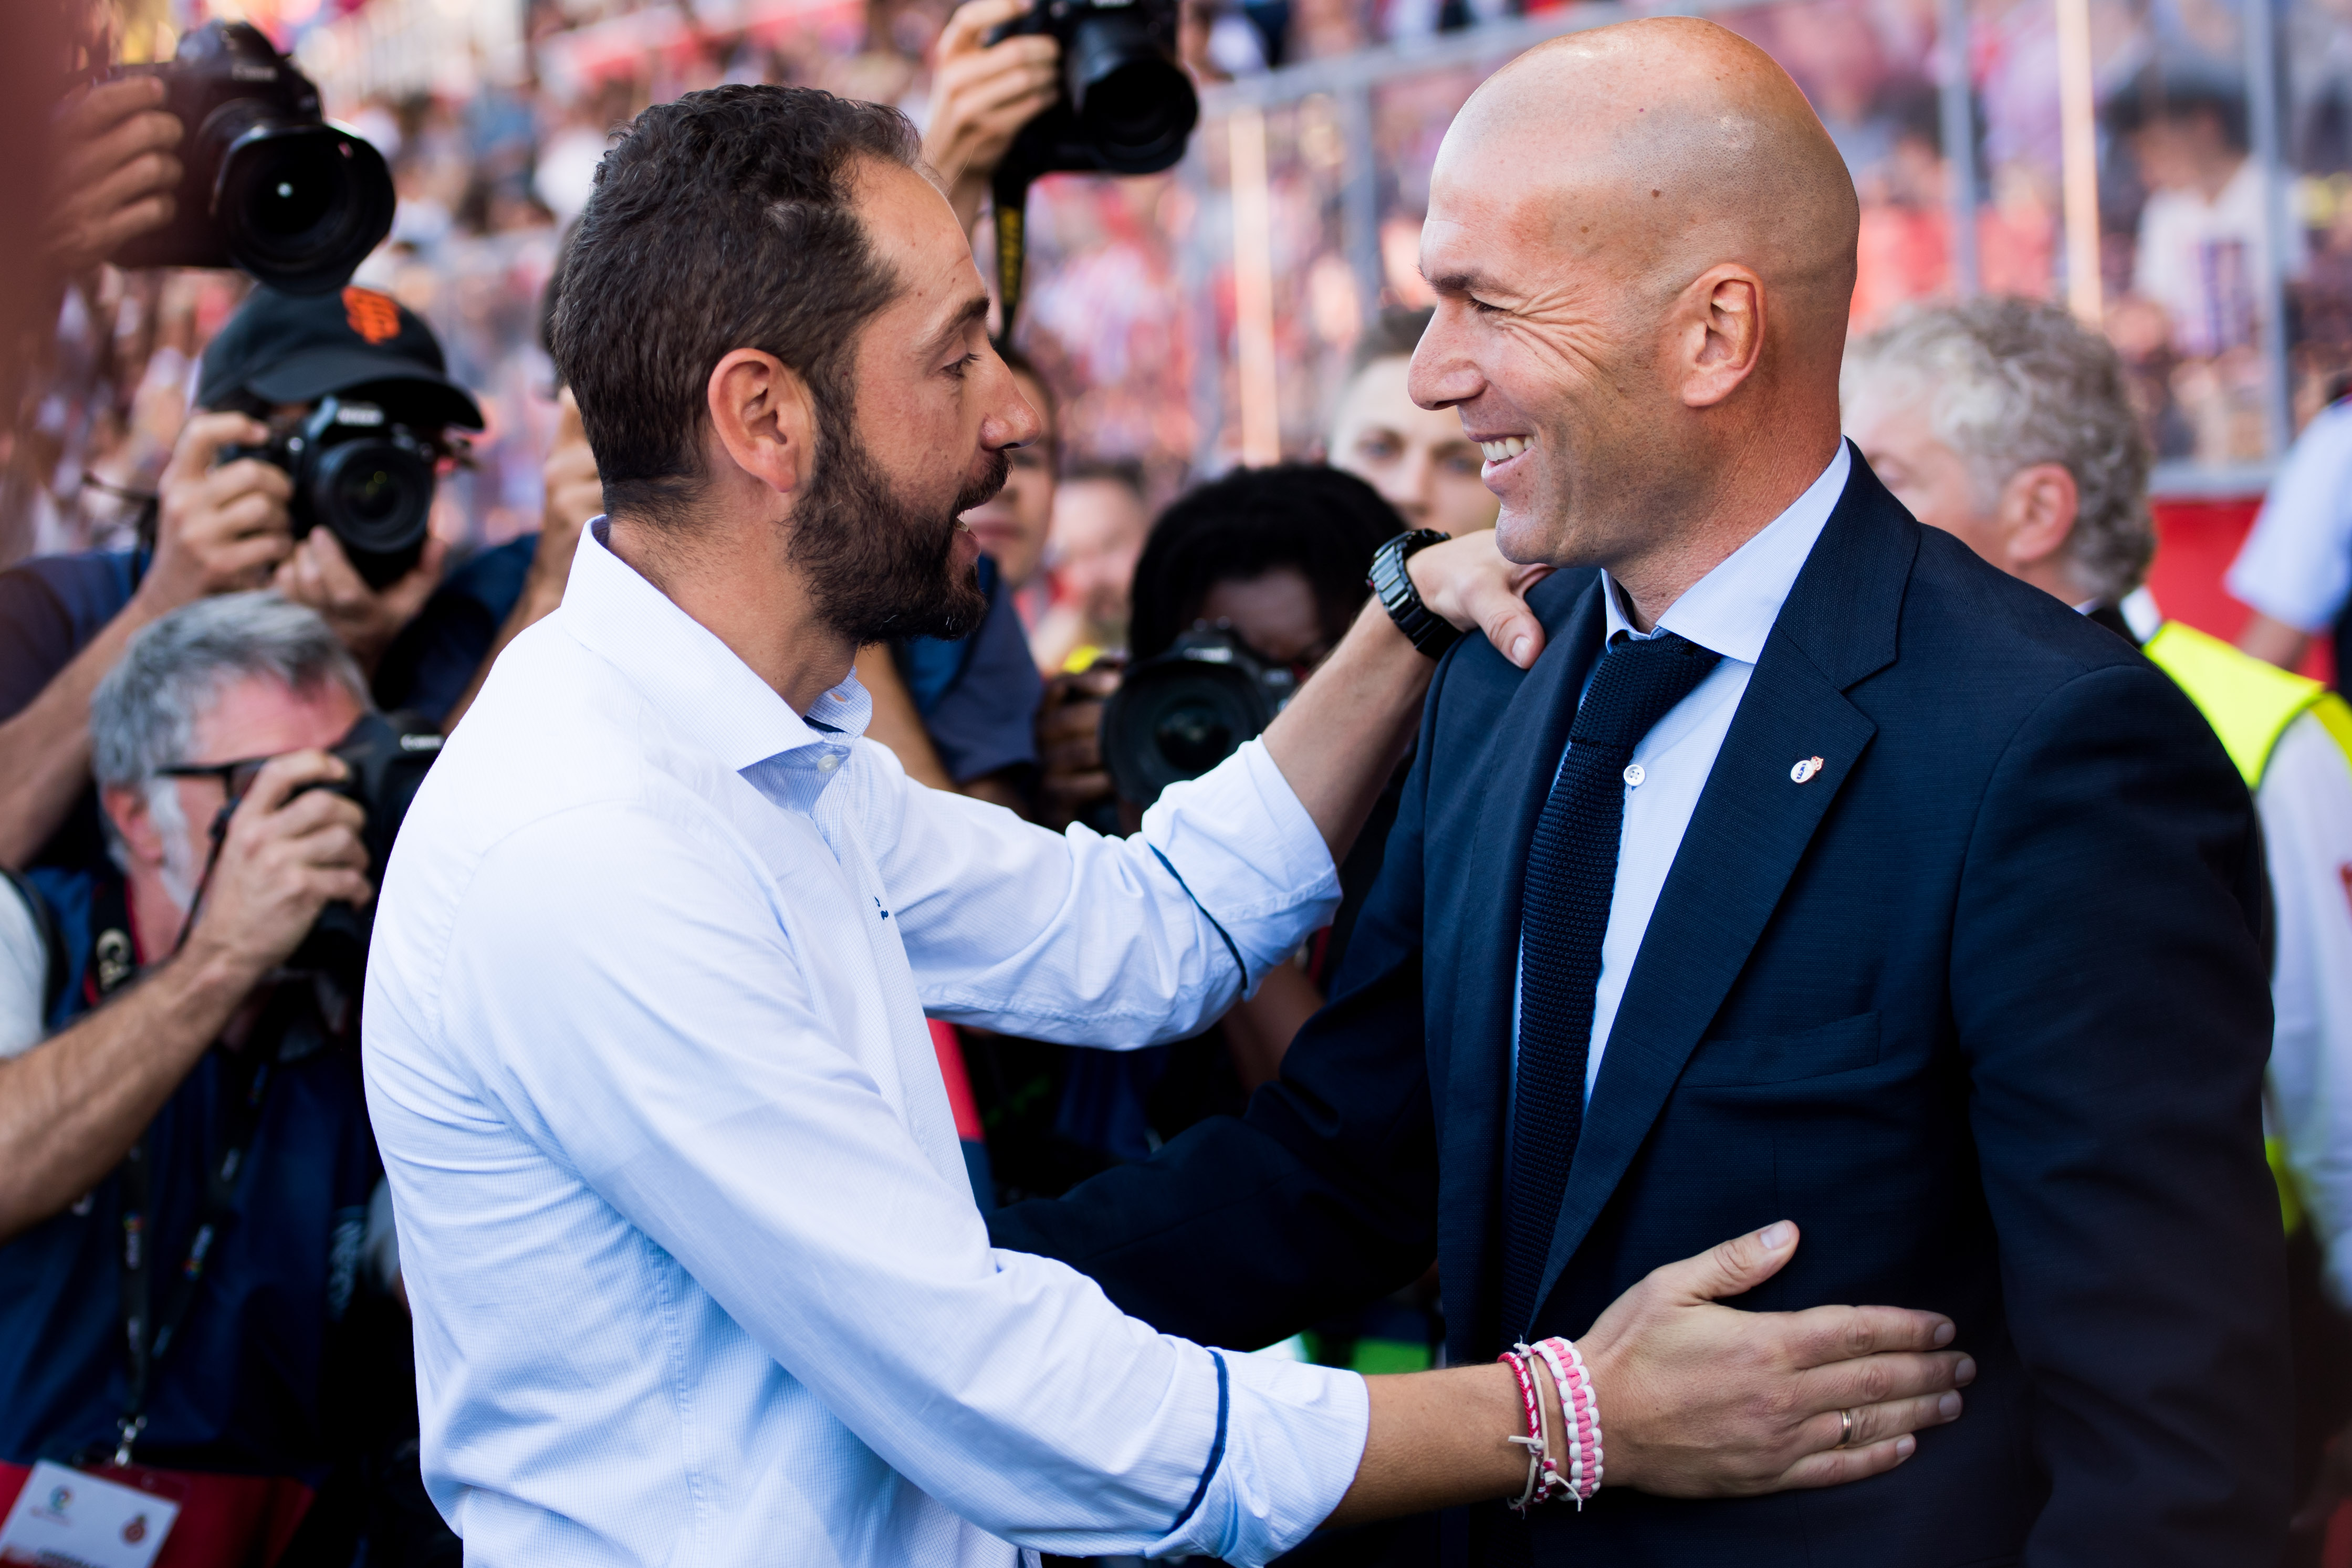 GIRONA, SPAIN - OCTOBER 29: Head Coach Pablo Machin (L) and Head Coach Zinedine Zidane meet ahead of the La Liga match between Girona and Real Madrid at Estadi de Montilivi on October 29, 2017 in Girona, Spain. (Photo by Alex Caparros/Getty Images)